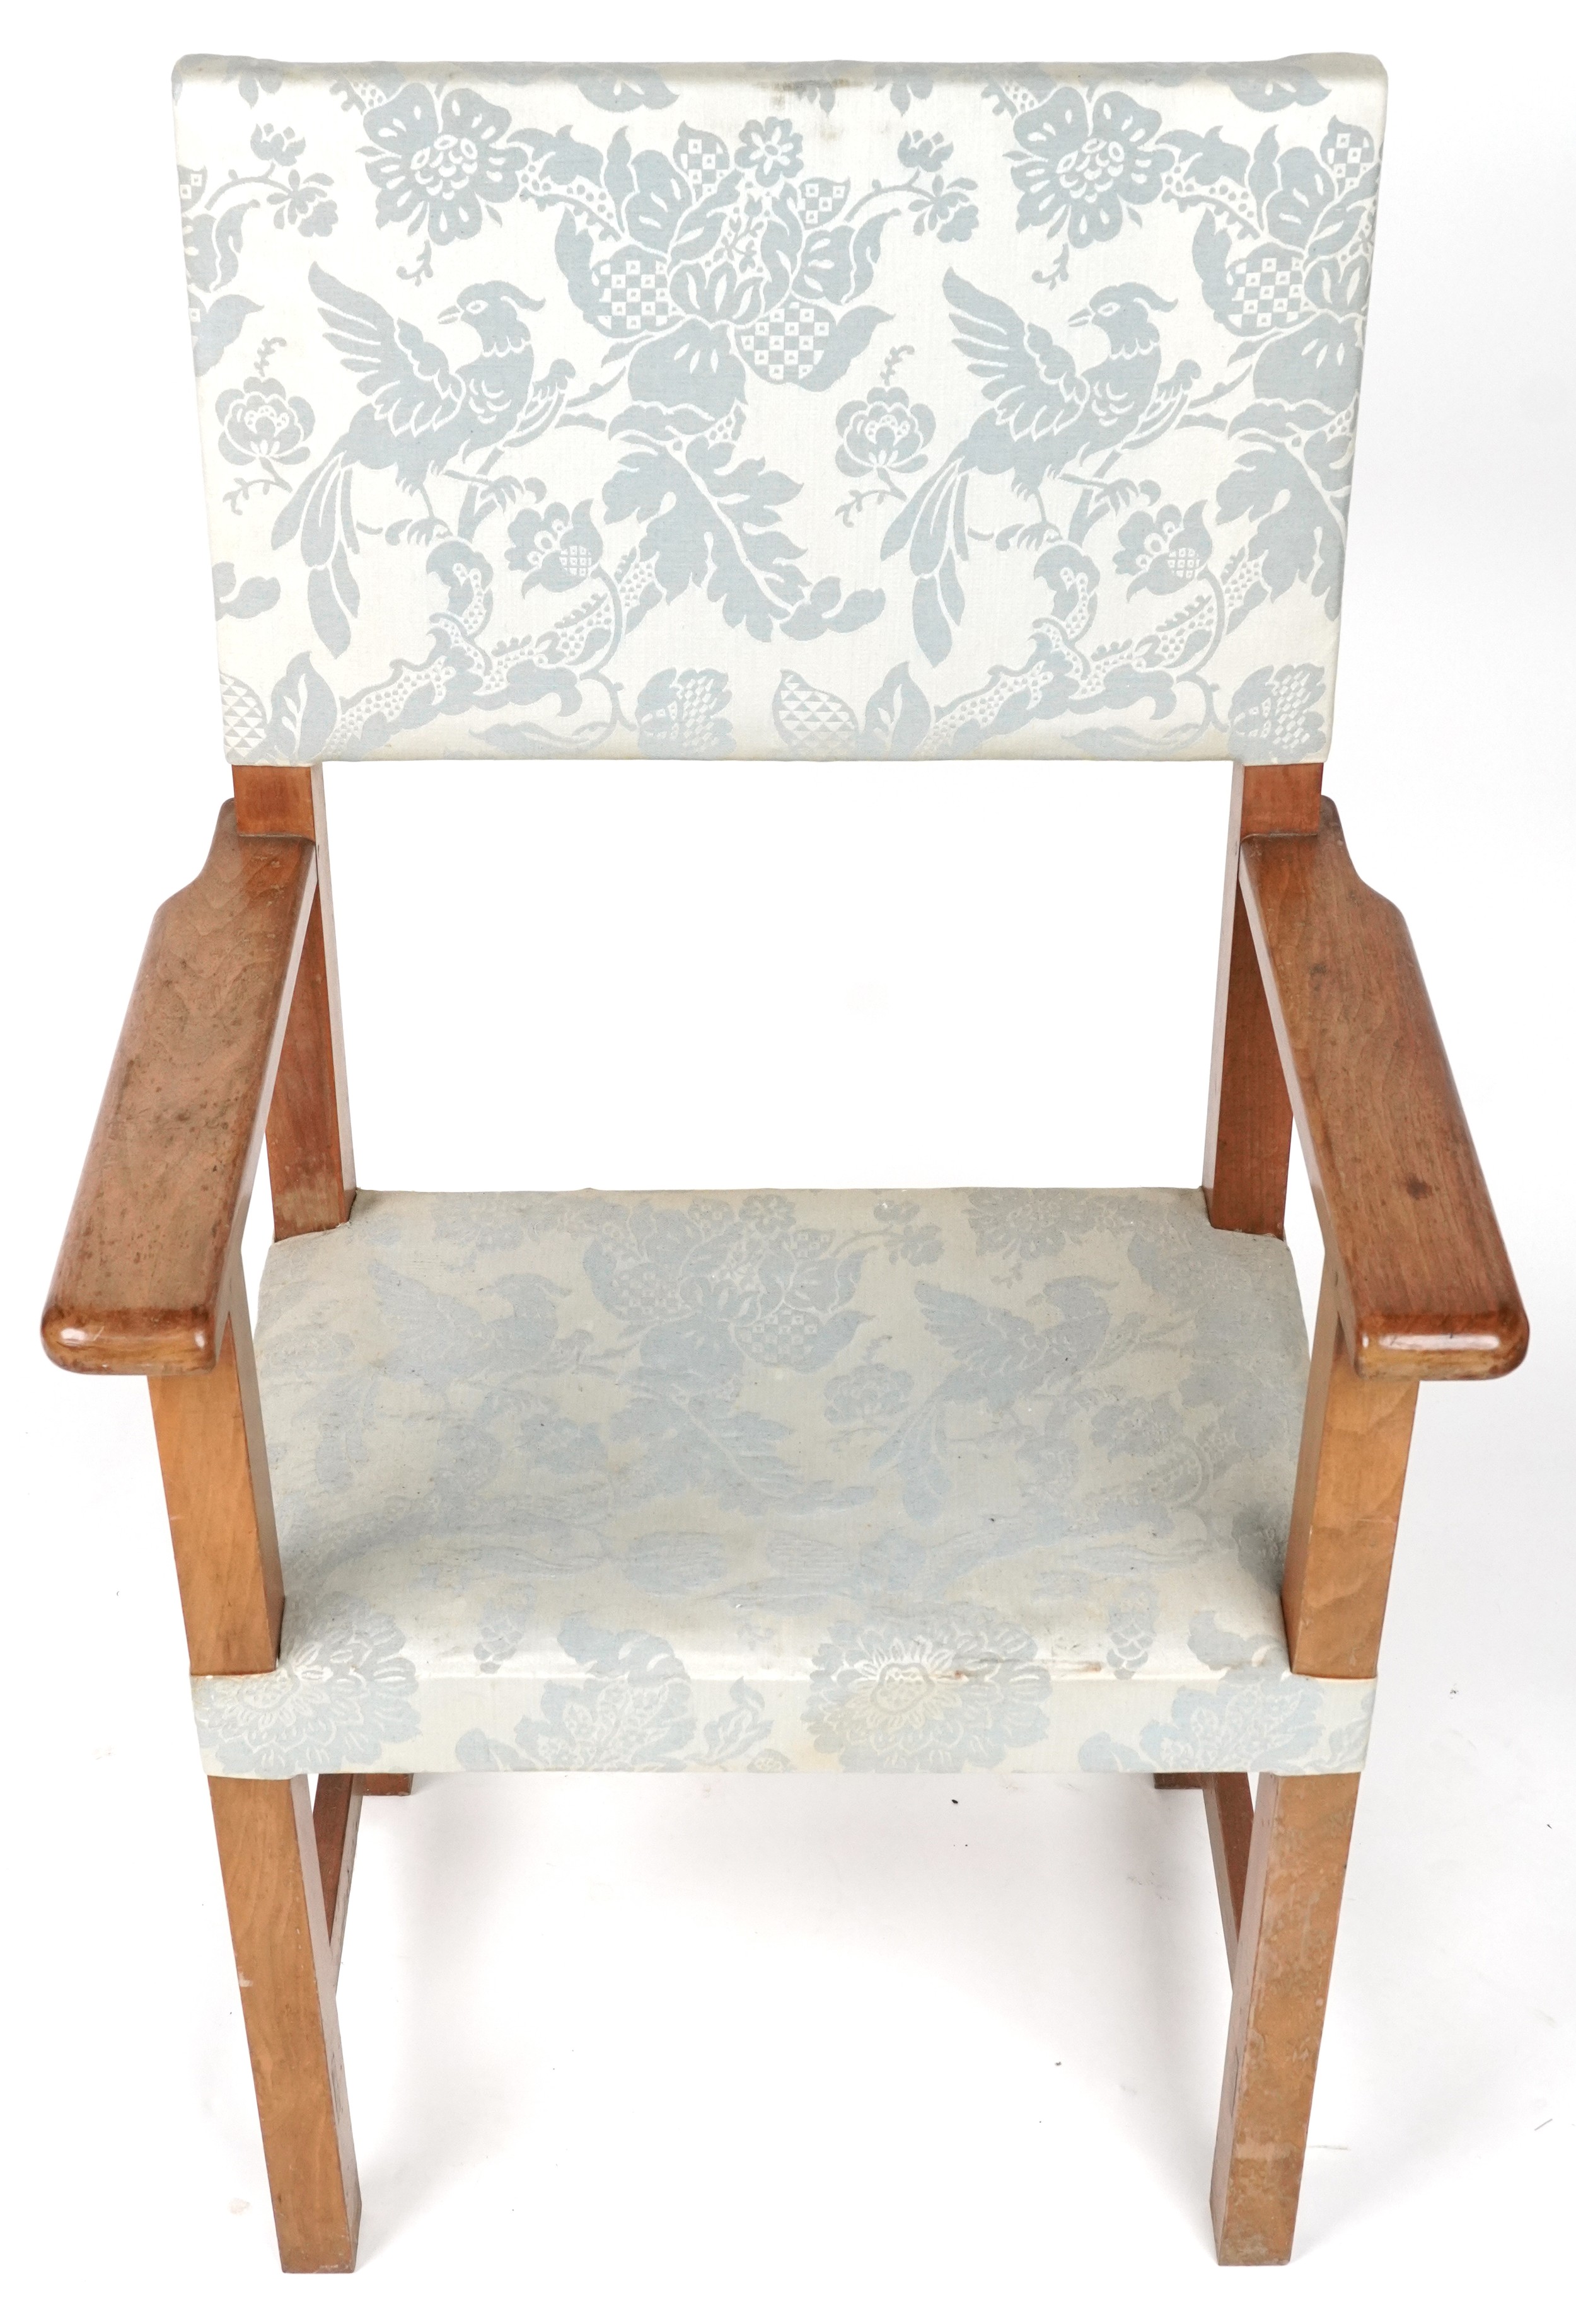 Arts & Crafts lightwood framed open armchair with bird of paradise upholstery, 118cm high - Image 3 of 4